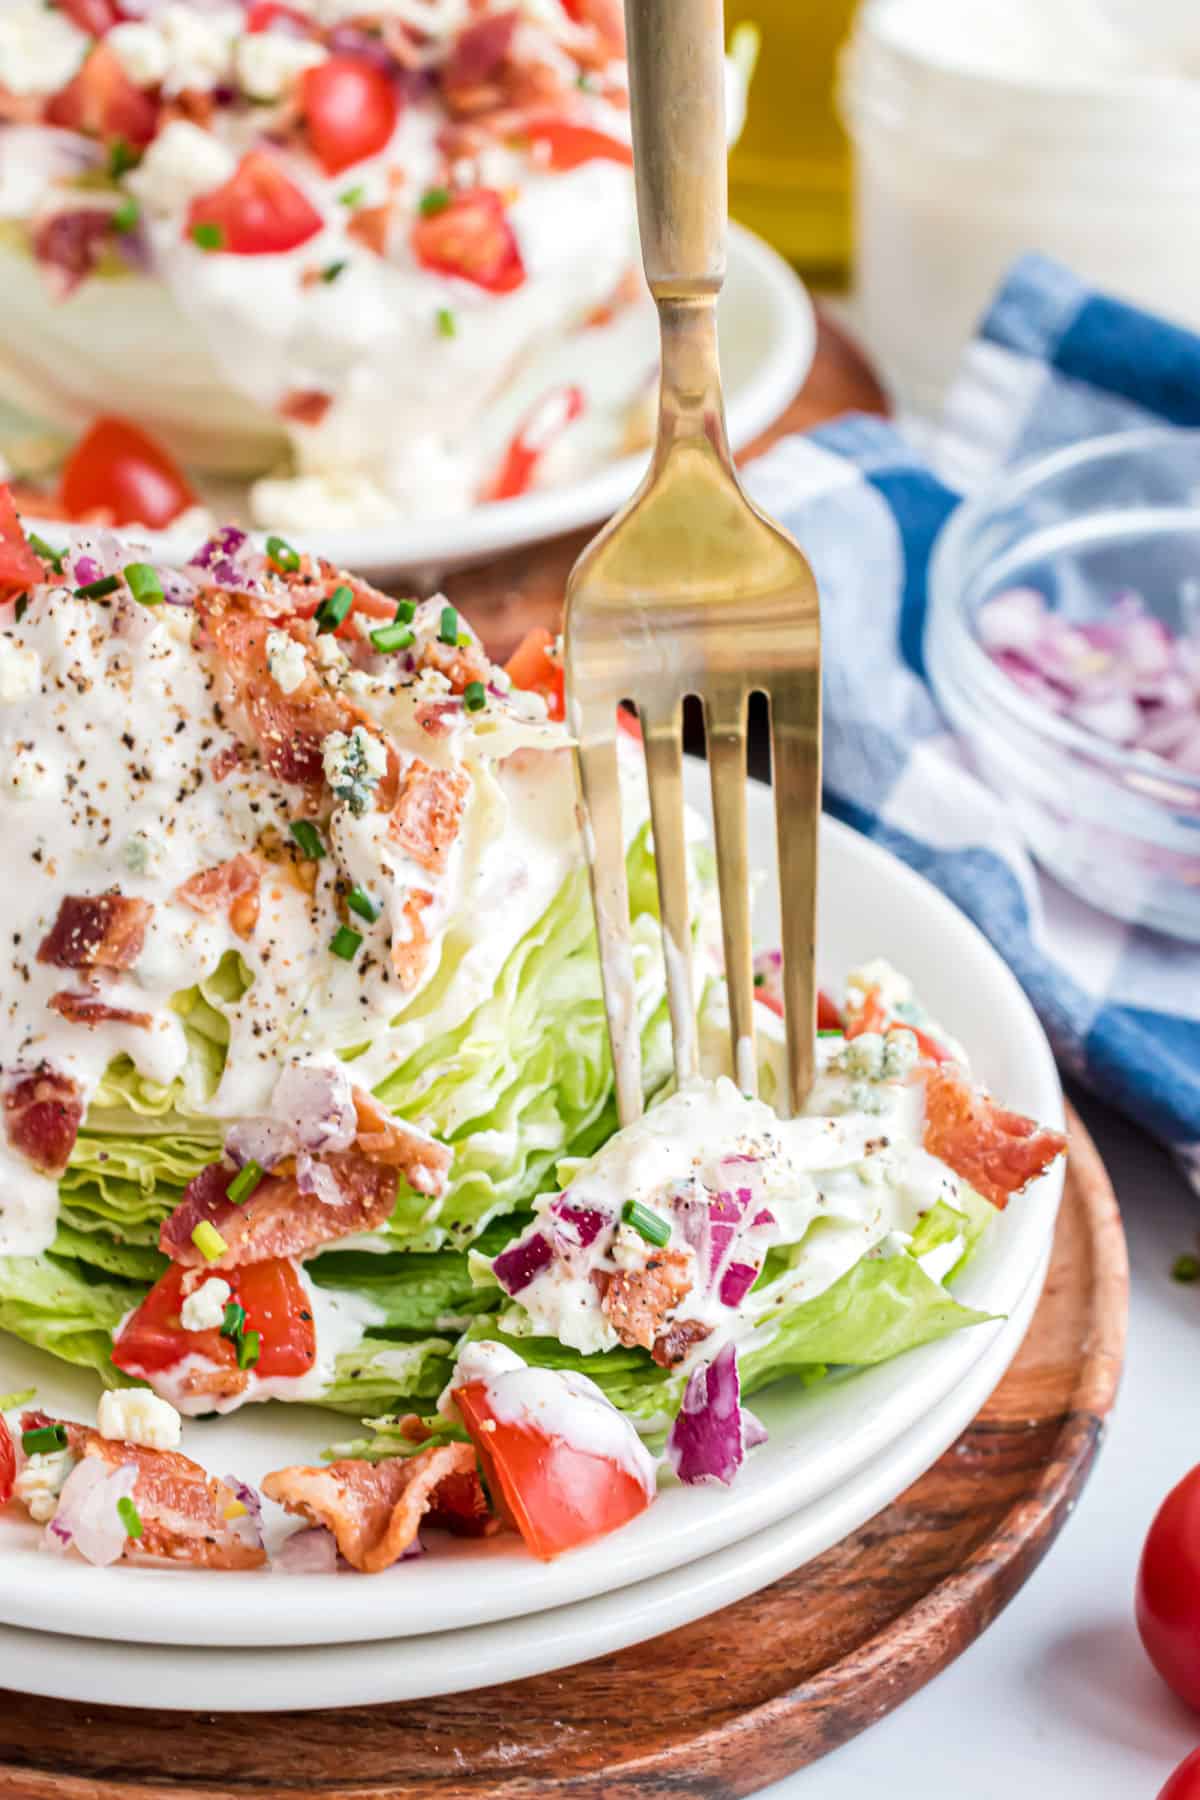 Wedge salad on a white plate with a bite being taken.